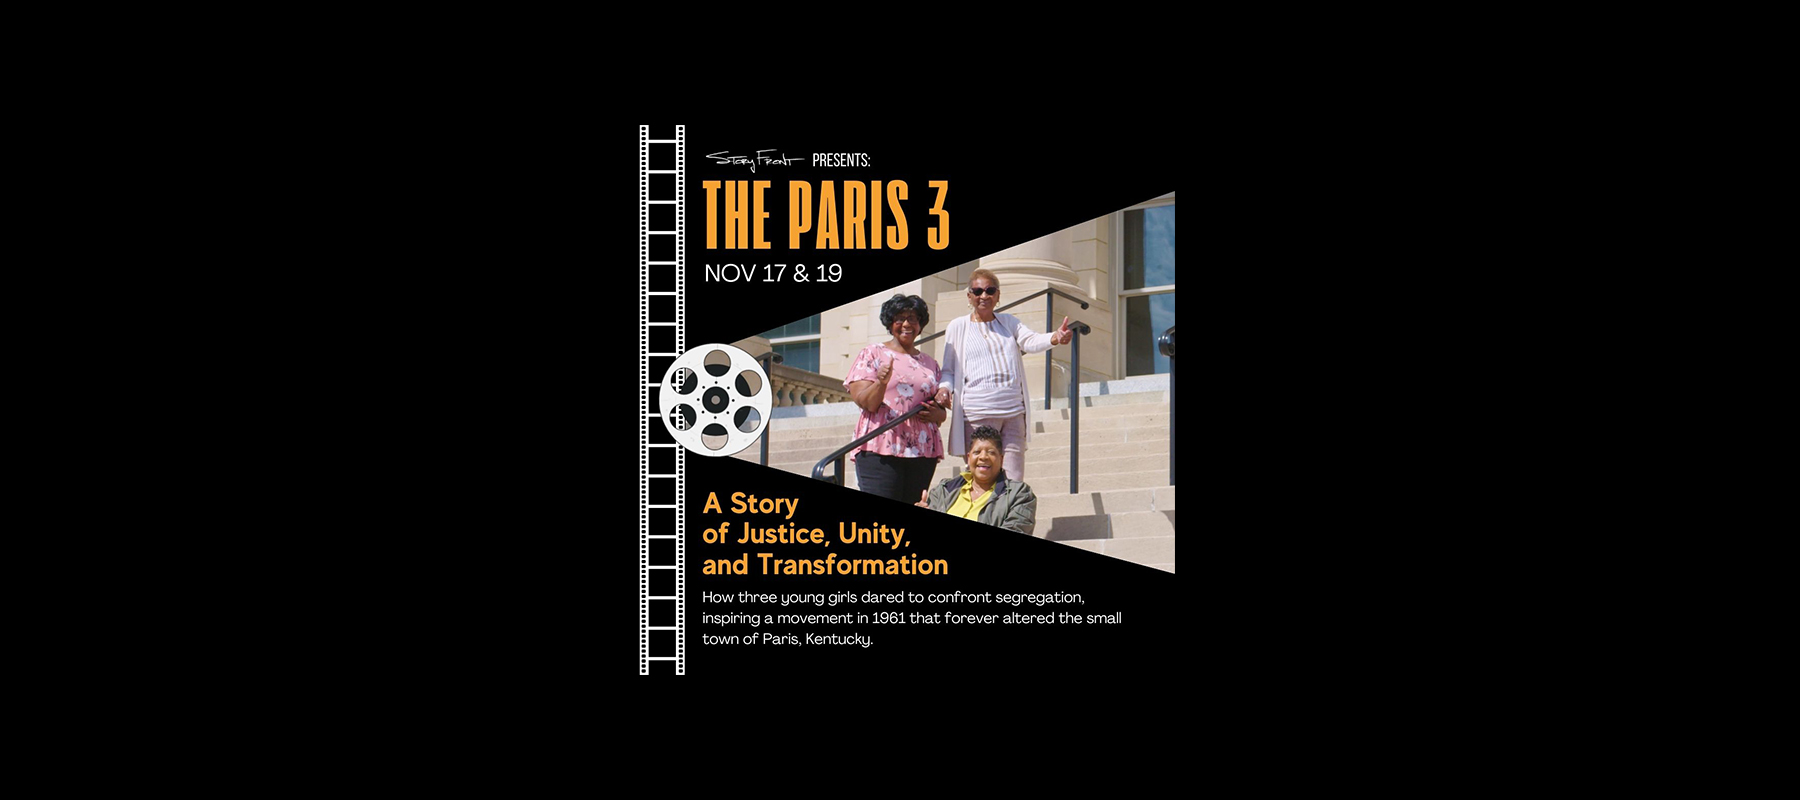 Story Front Presents: The Paris 3 Nov 17 & 19 A Story of Justice, Unity, and Transformation How three young girls dared to confront segregation, inspiring a movement in 1961 that forever altered the small town of Paris, Kentucky